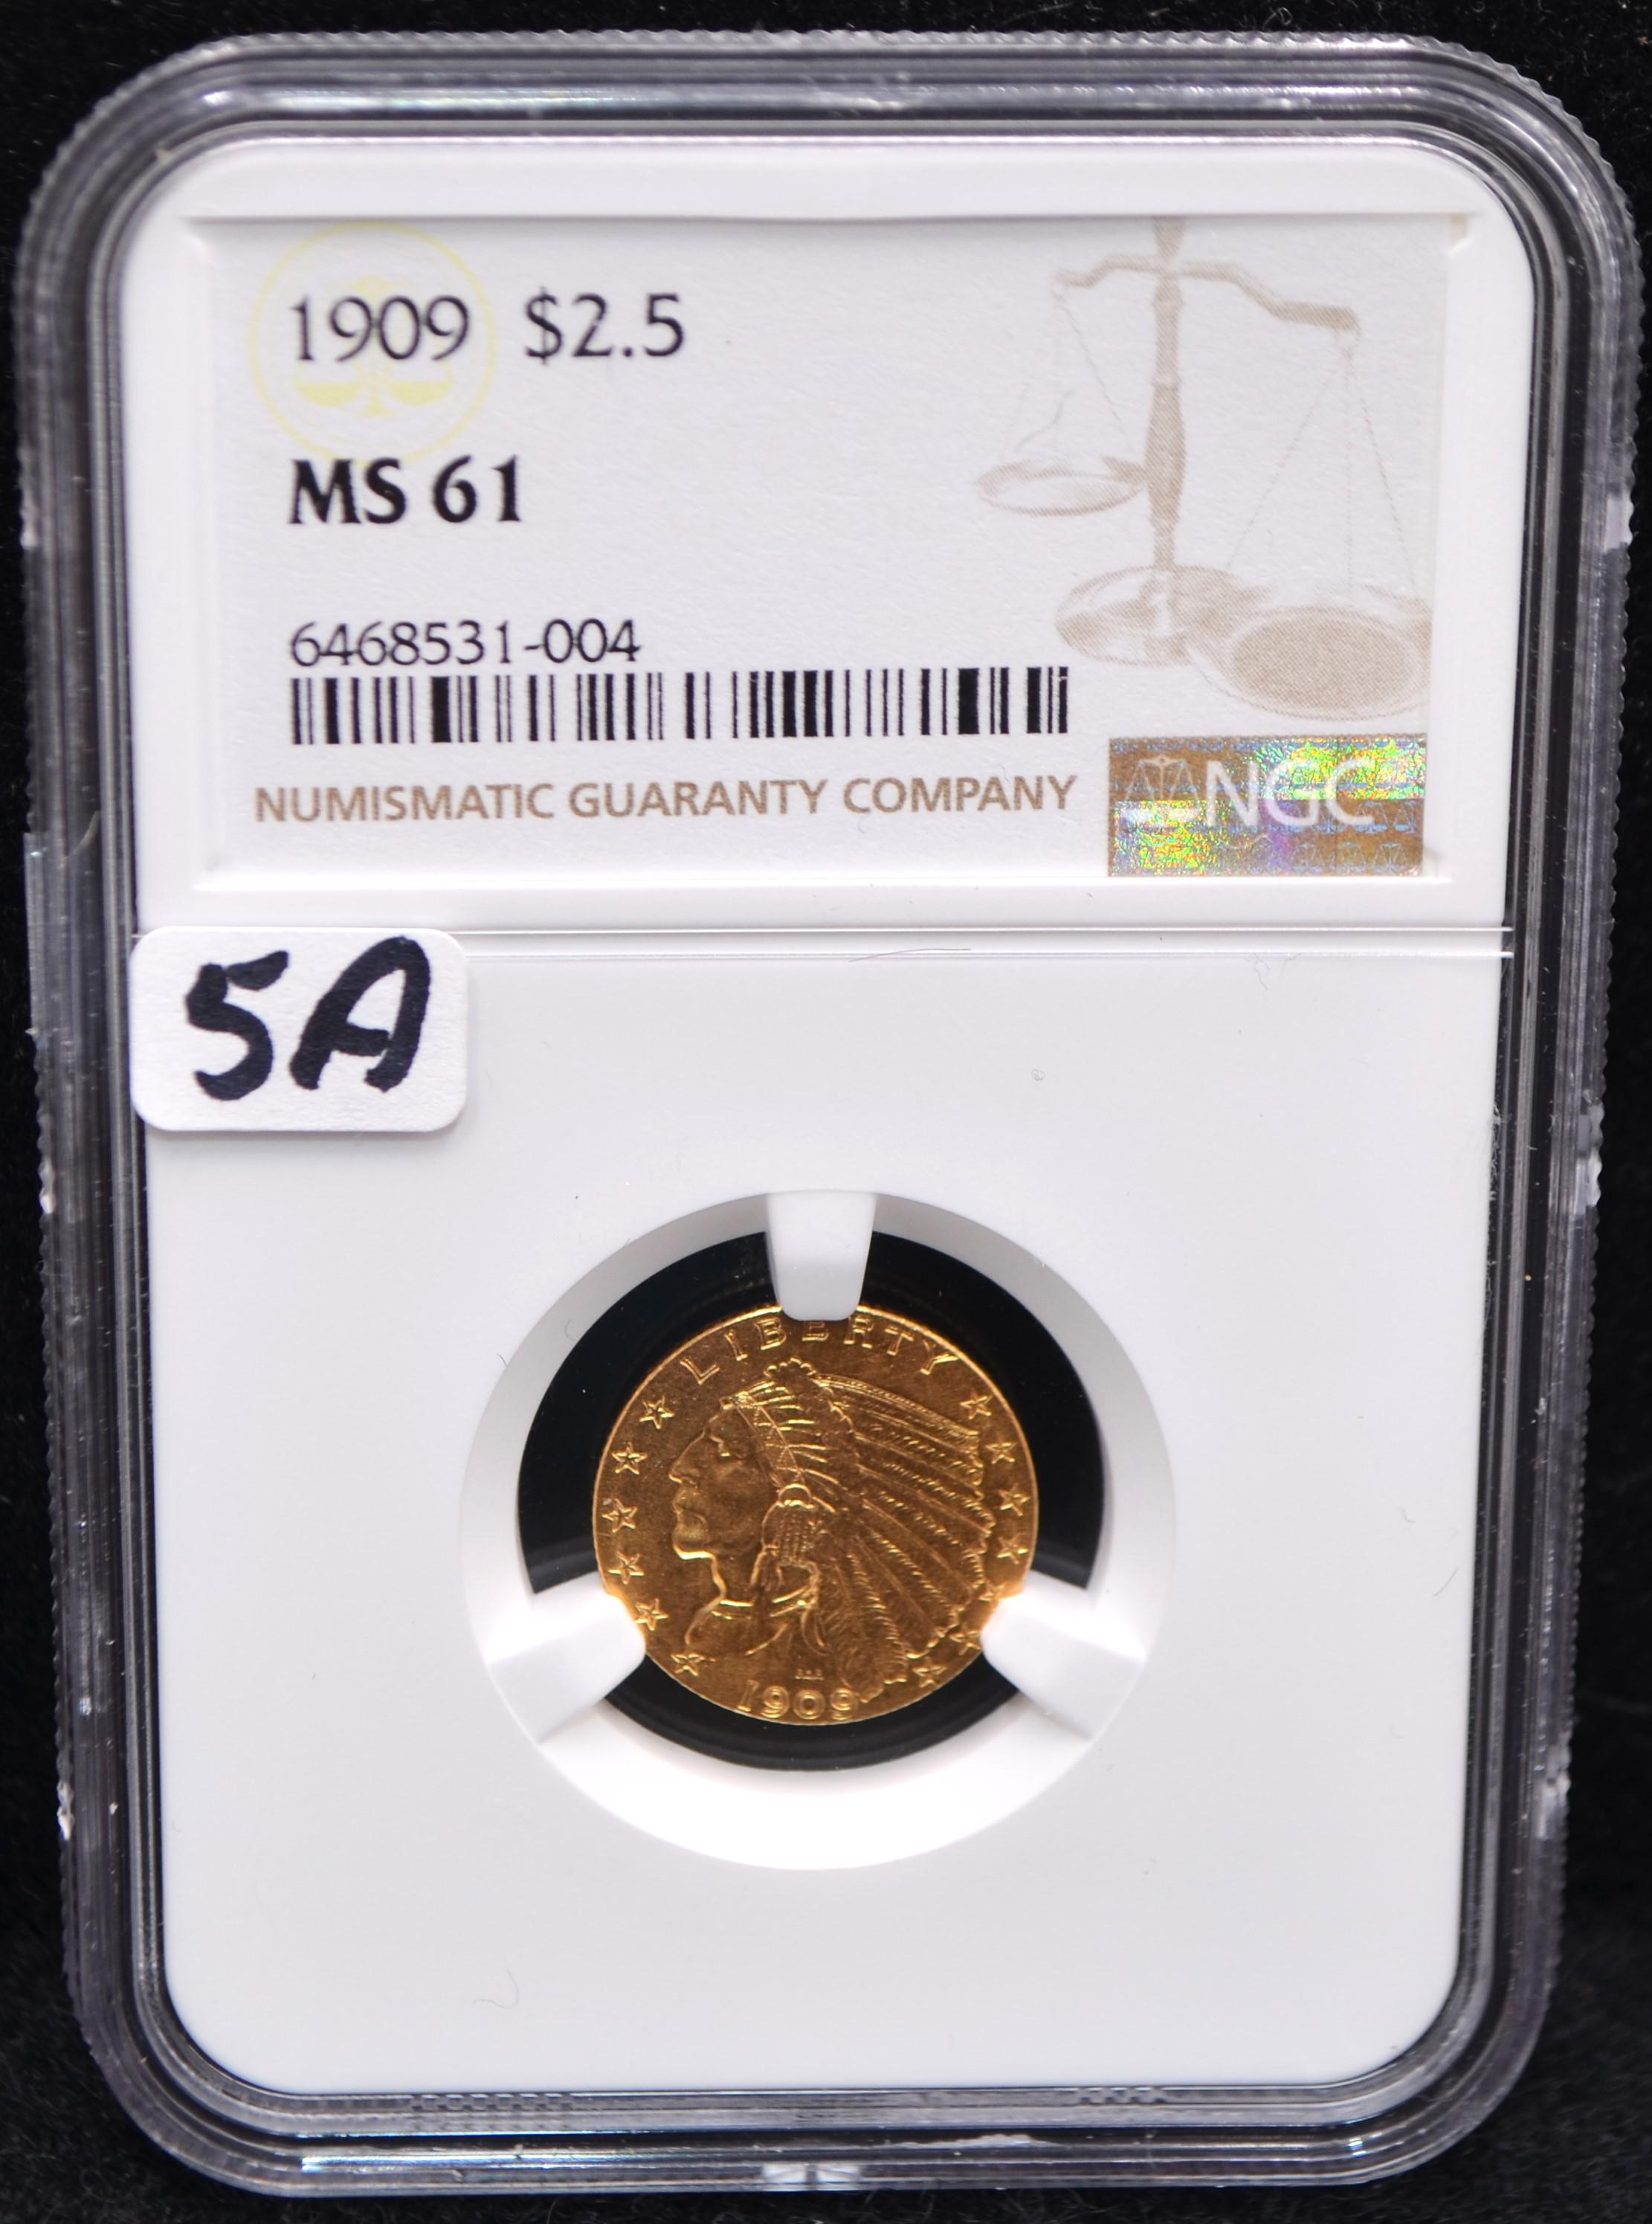 1909 $2 1/2 INDIAN HEAD GOLD COIN - NGC MS61